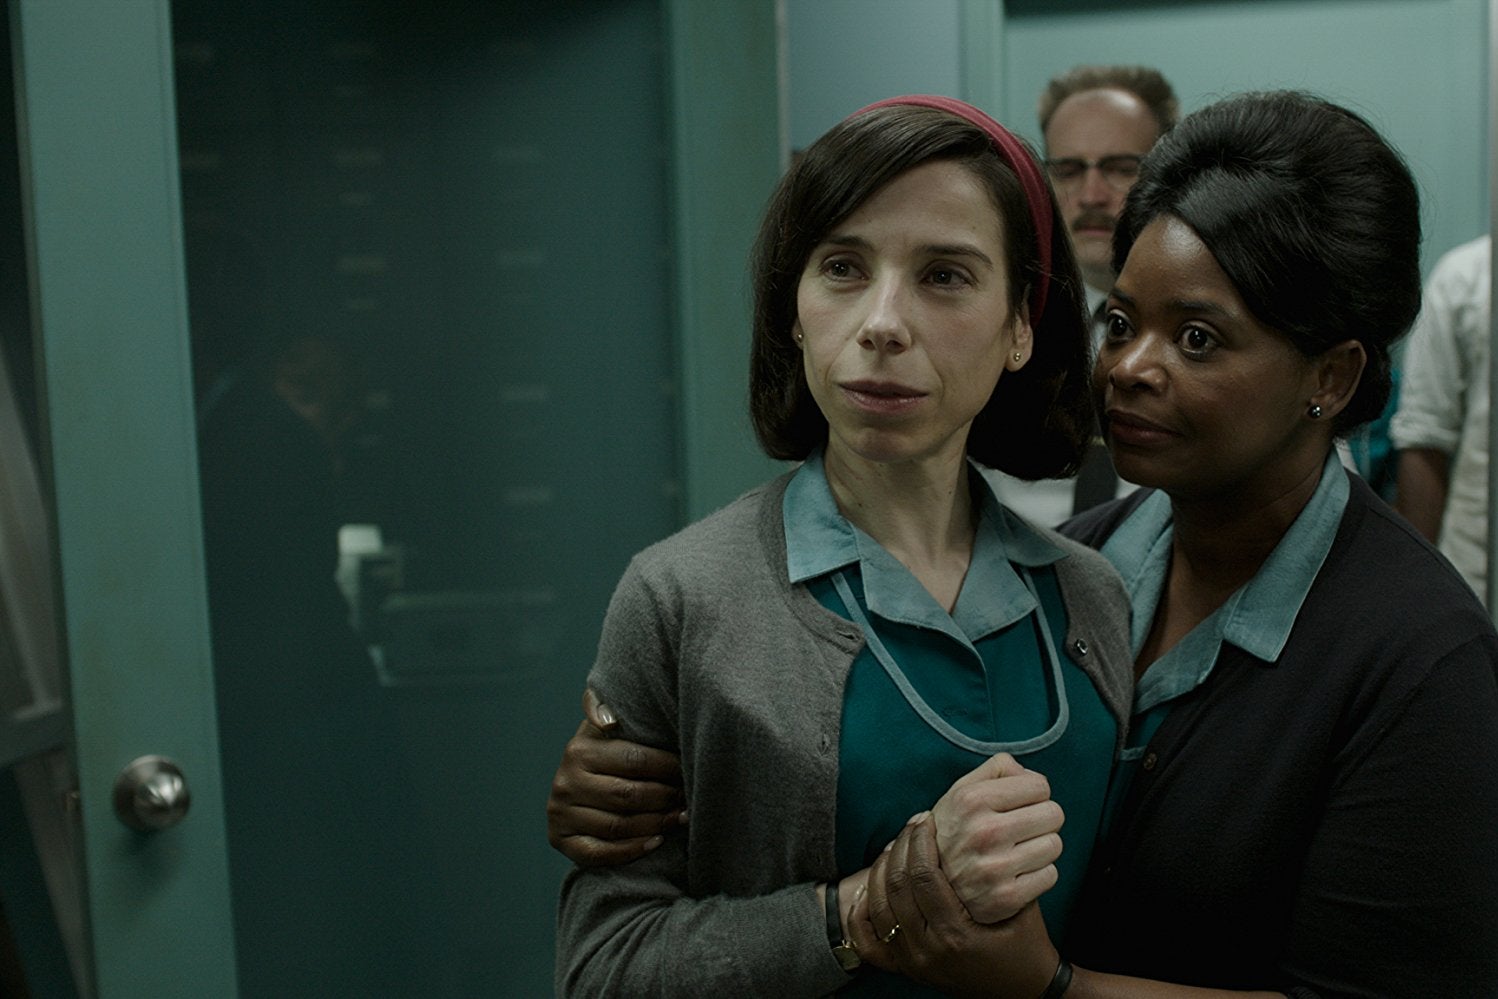 Sally Hawkins and Octavia Spencer in The Shape of Water.